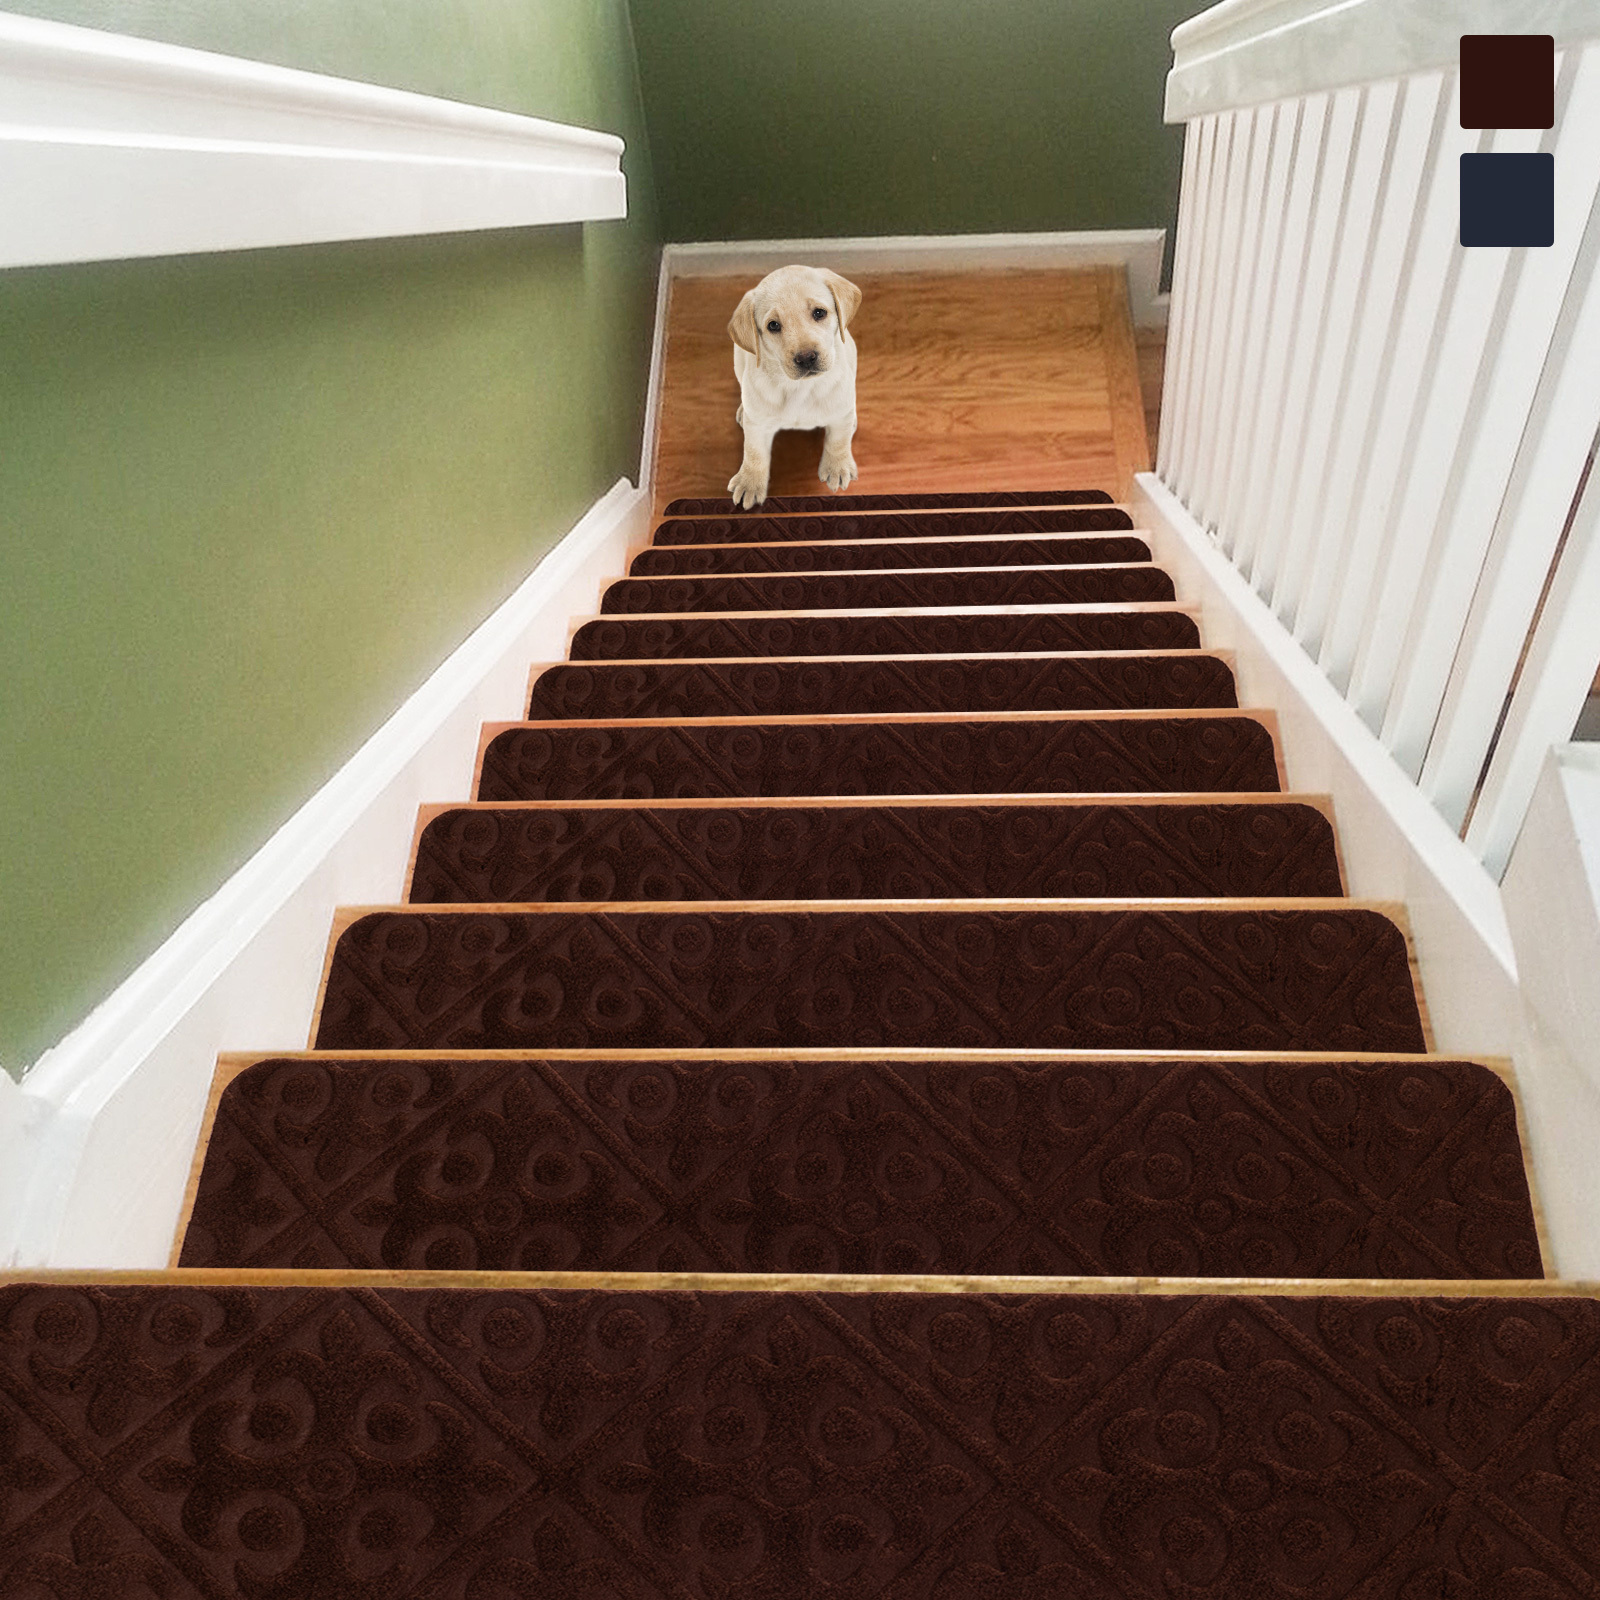 

Costway 15pcs Non-slip Carpet Stair Treads 30" X 8" Mats Indoor For Wooden Steps Brown/for Home/for Pets